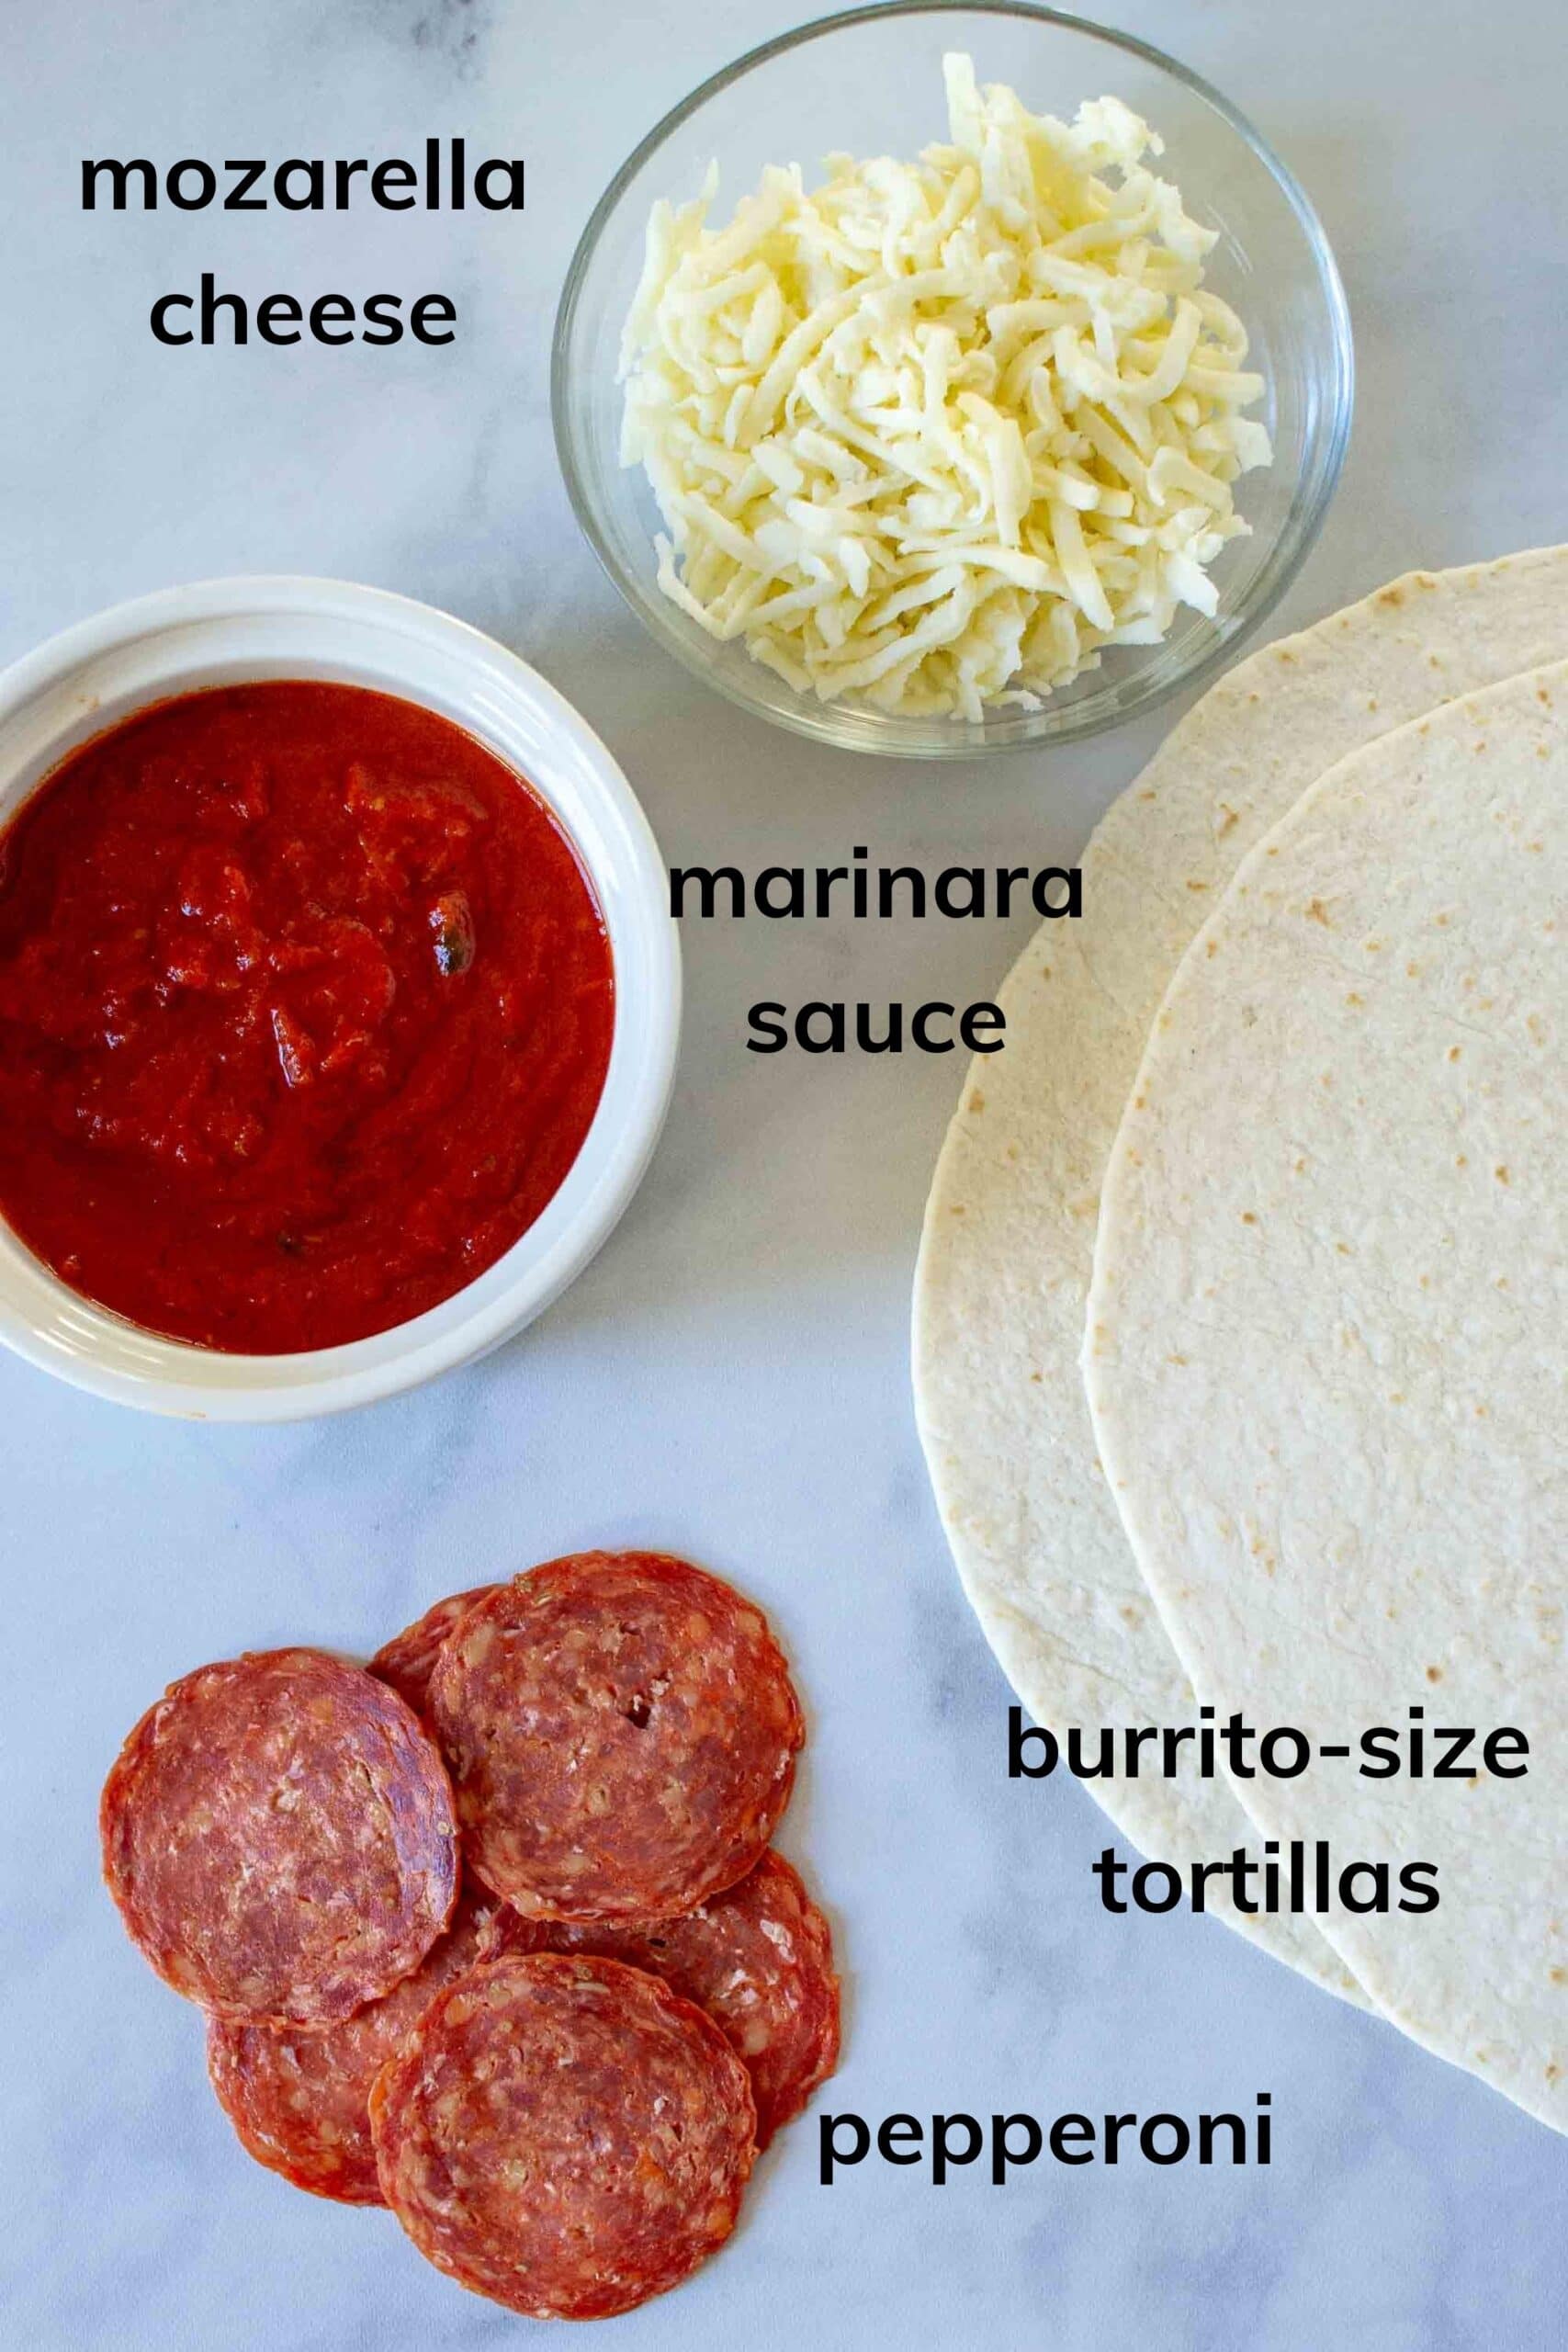 All ingredients for Pizza Tortilla Wrap or "Tortilla Trend" on table, labeled. 